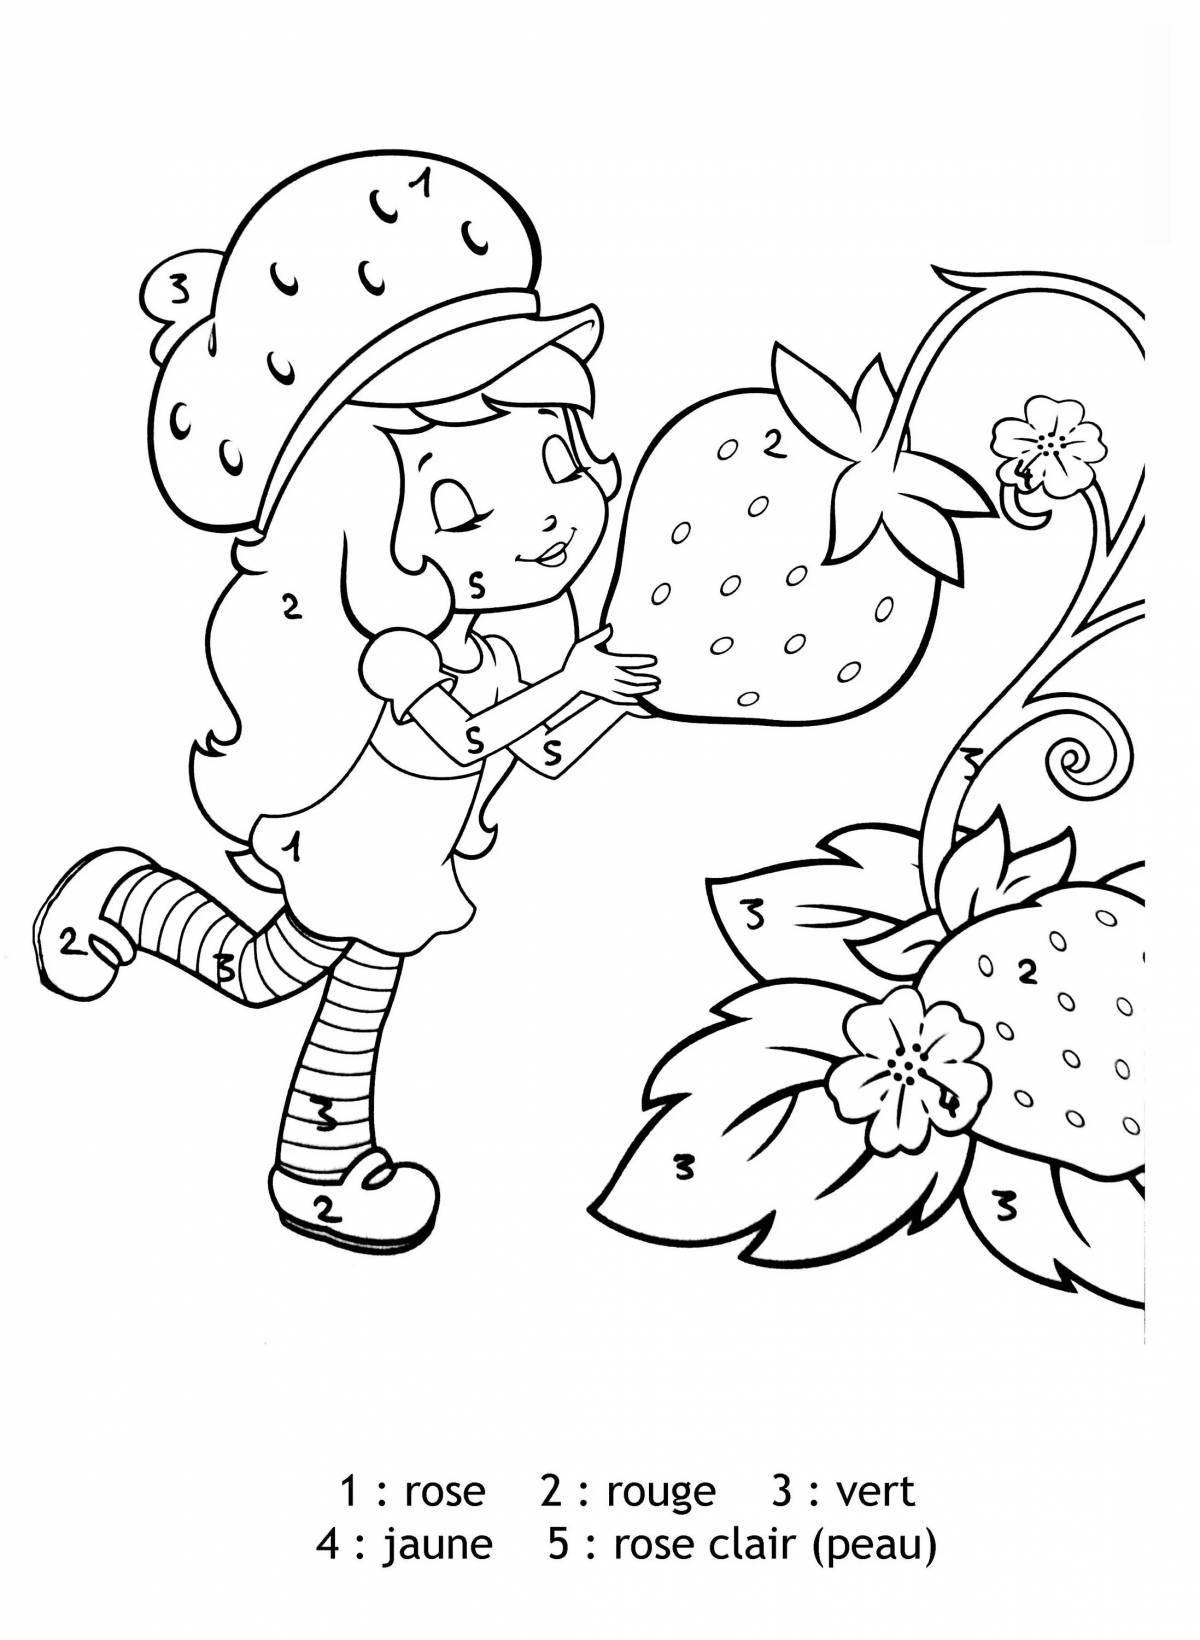 Colorful strawberry coloring page